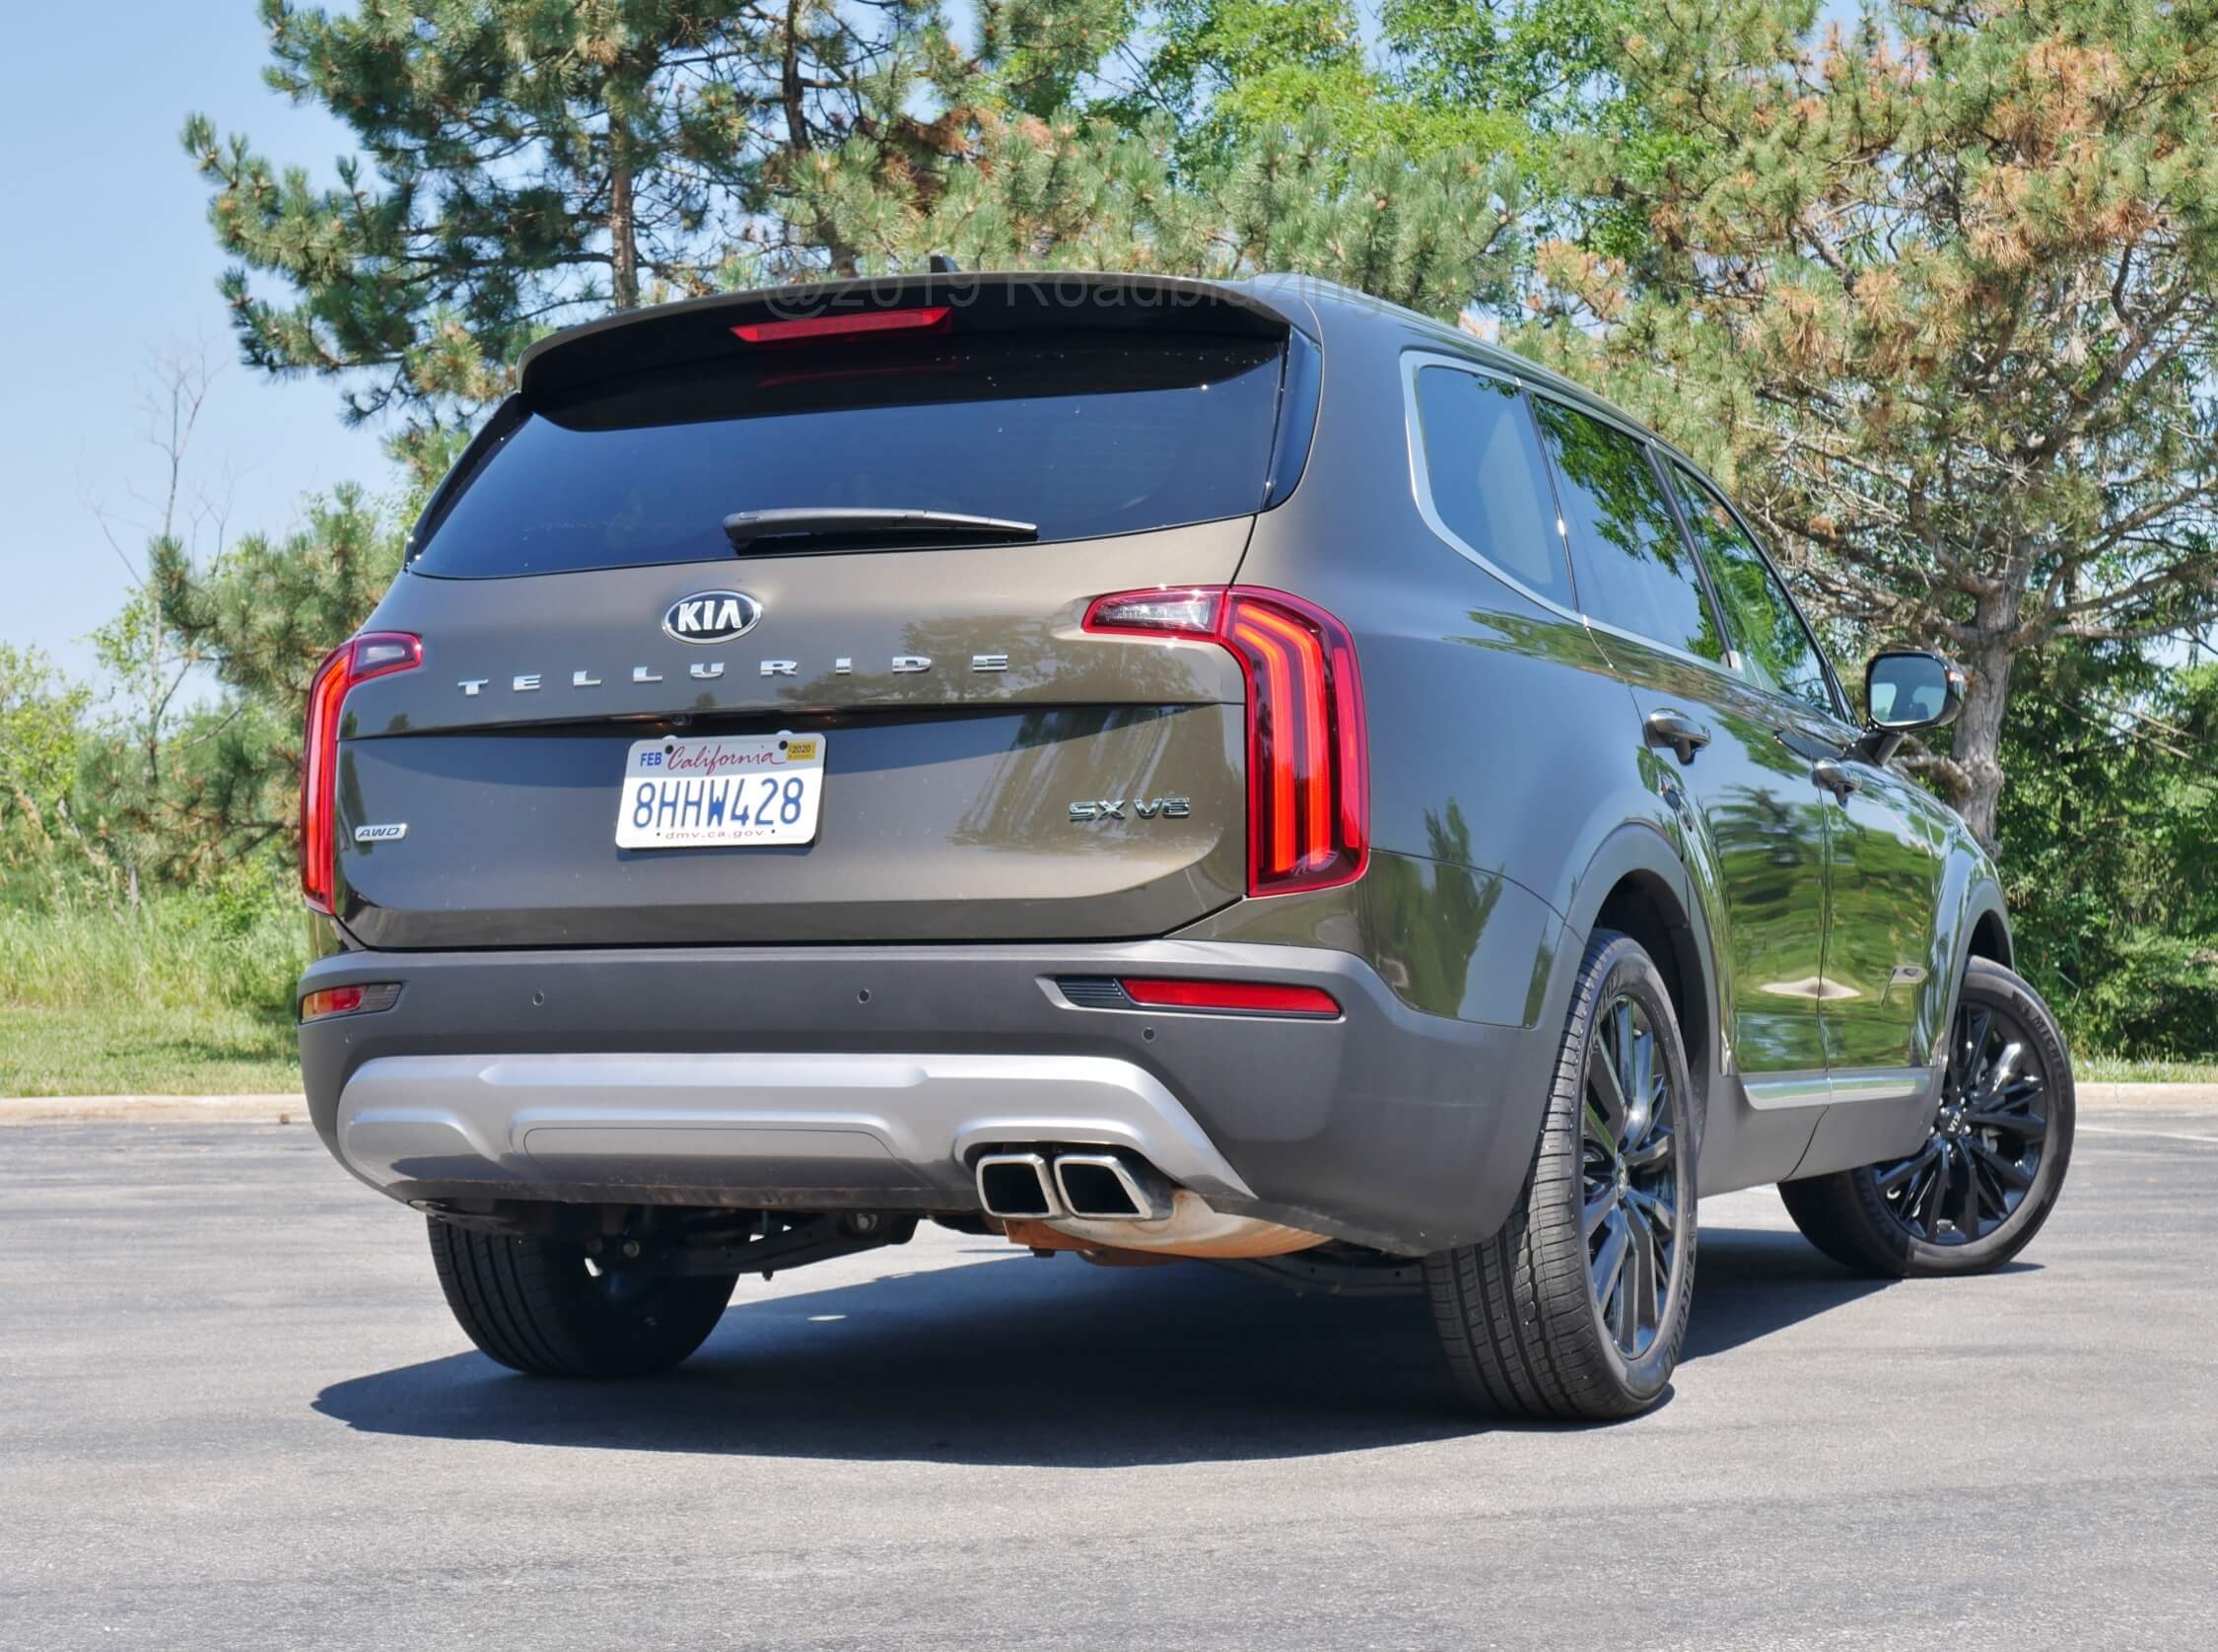 2020 Kia Telluride SX AWD: The mid tailgate is pinched with a single crease with the lower rear quarter and bumper rising up and outward in Range Rover fashion.